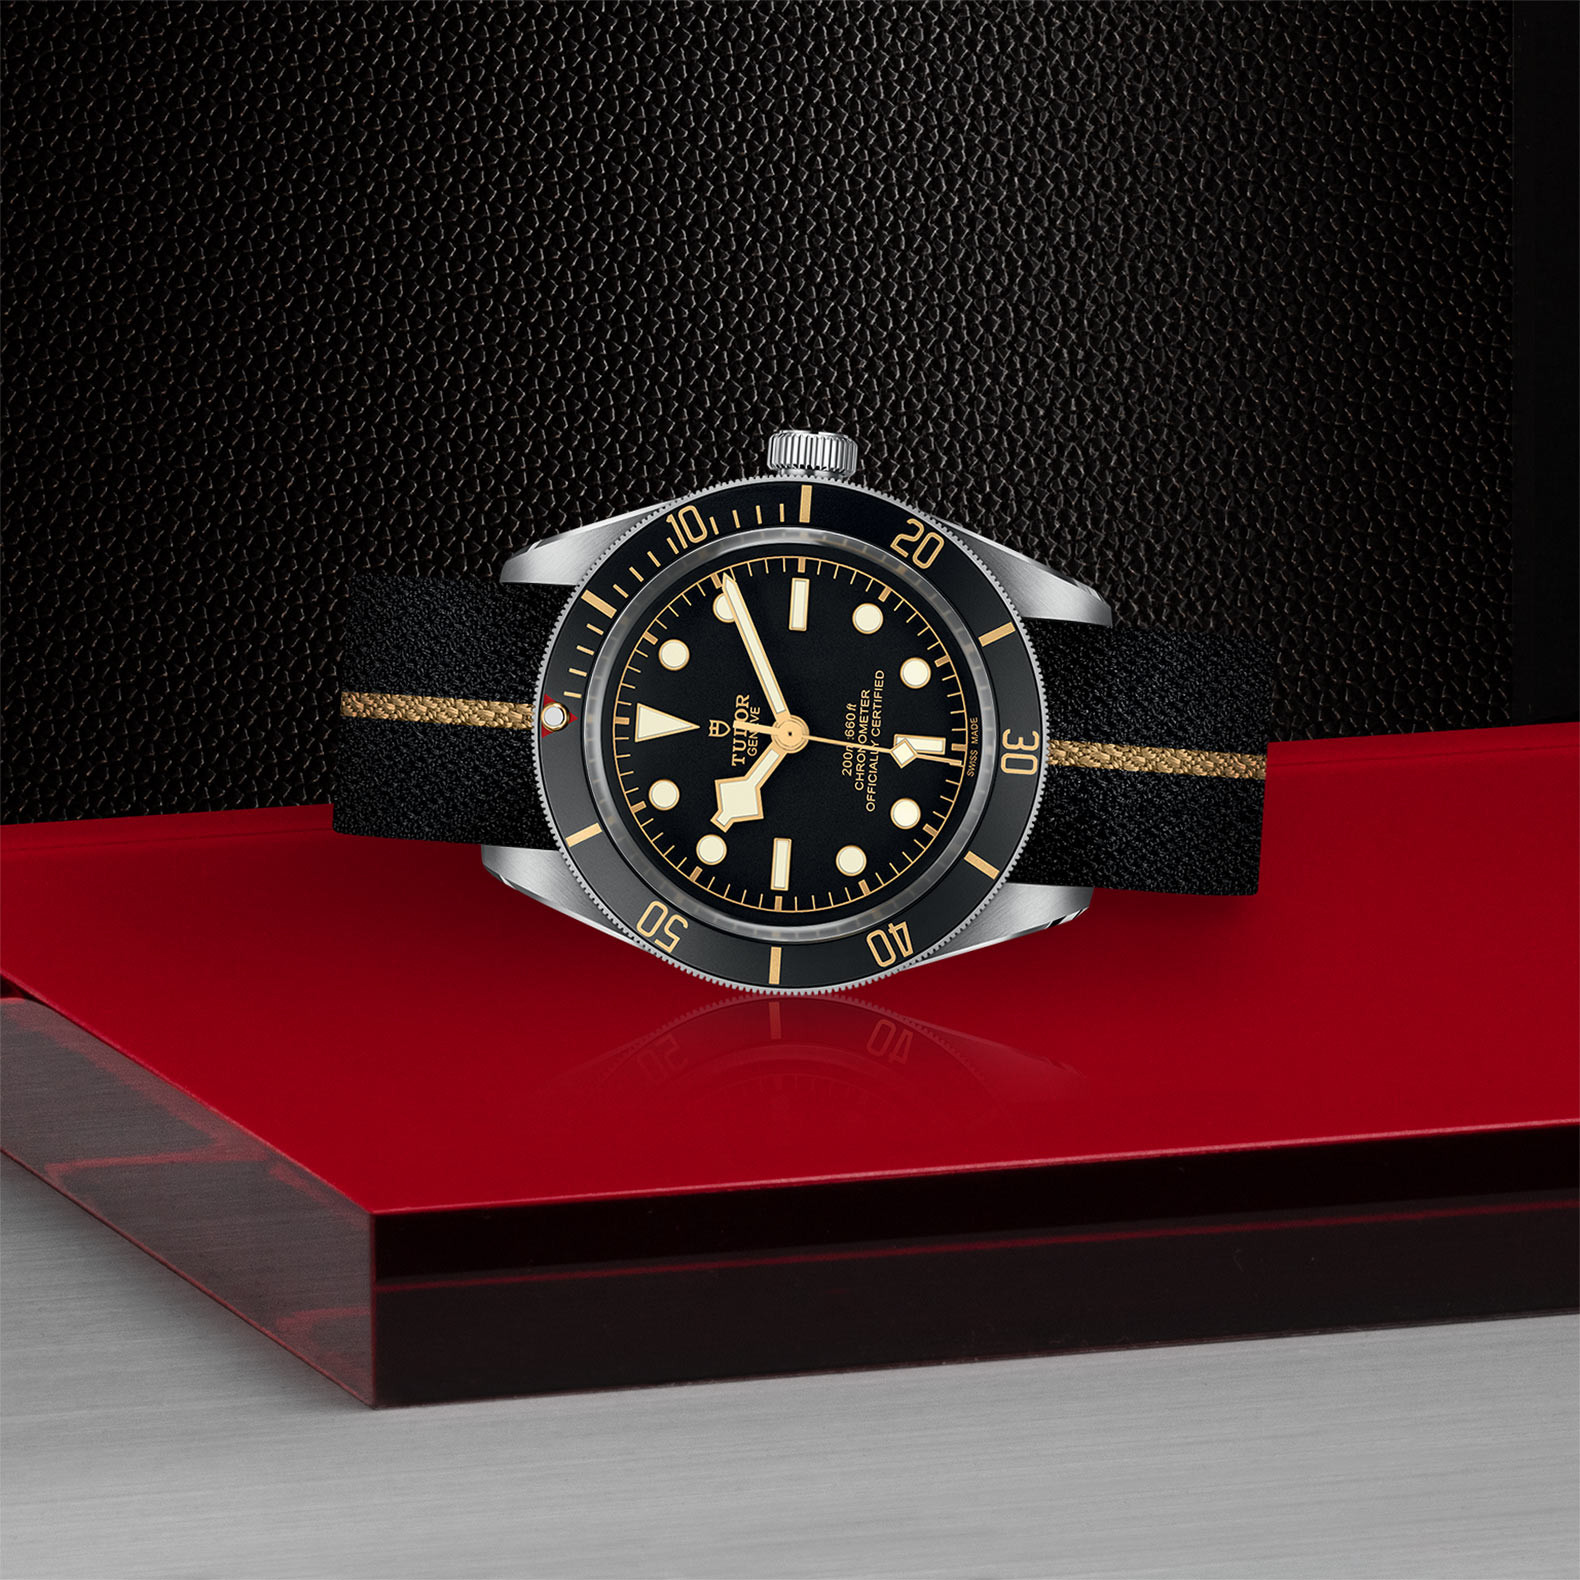 TUDOR Black Bay Fifty-Eight Watch in Store Laying Down